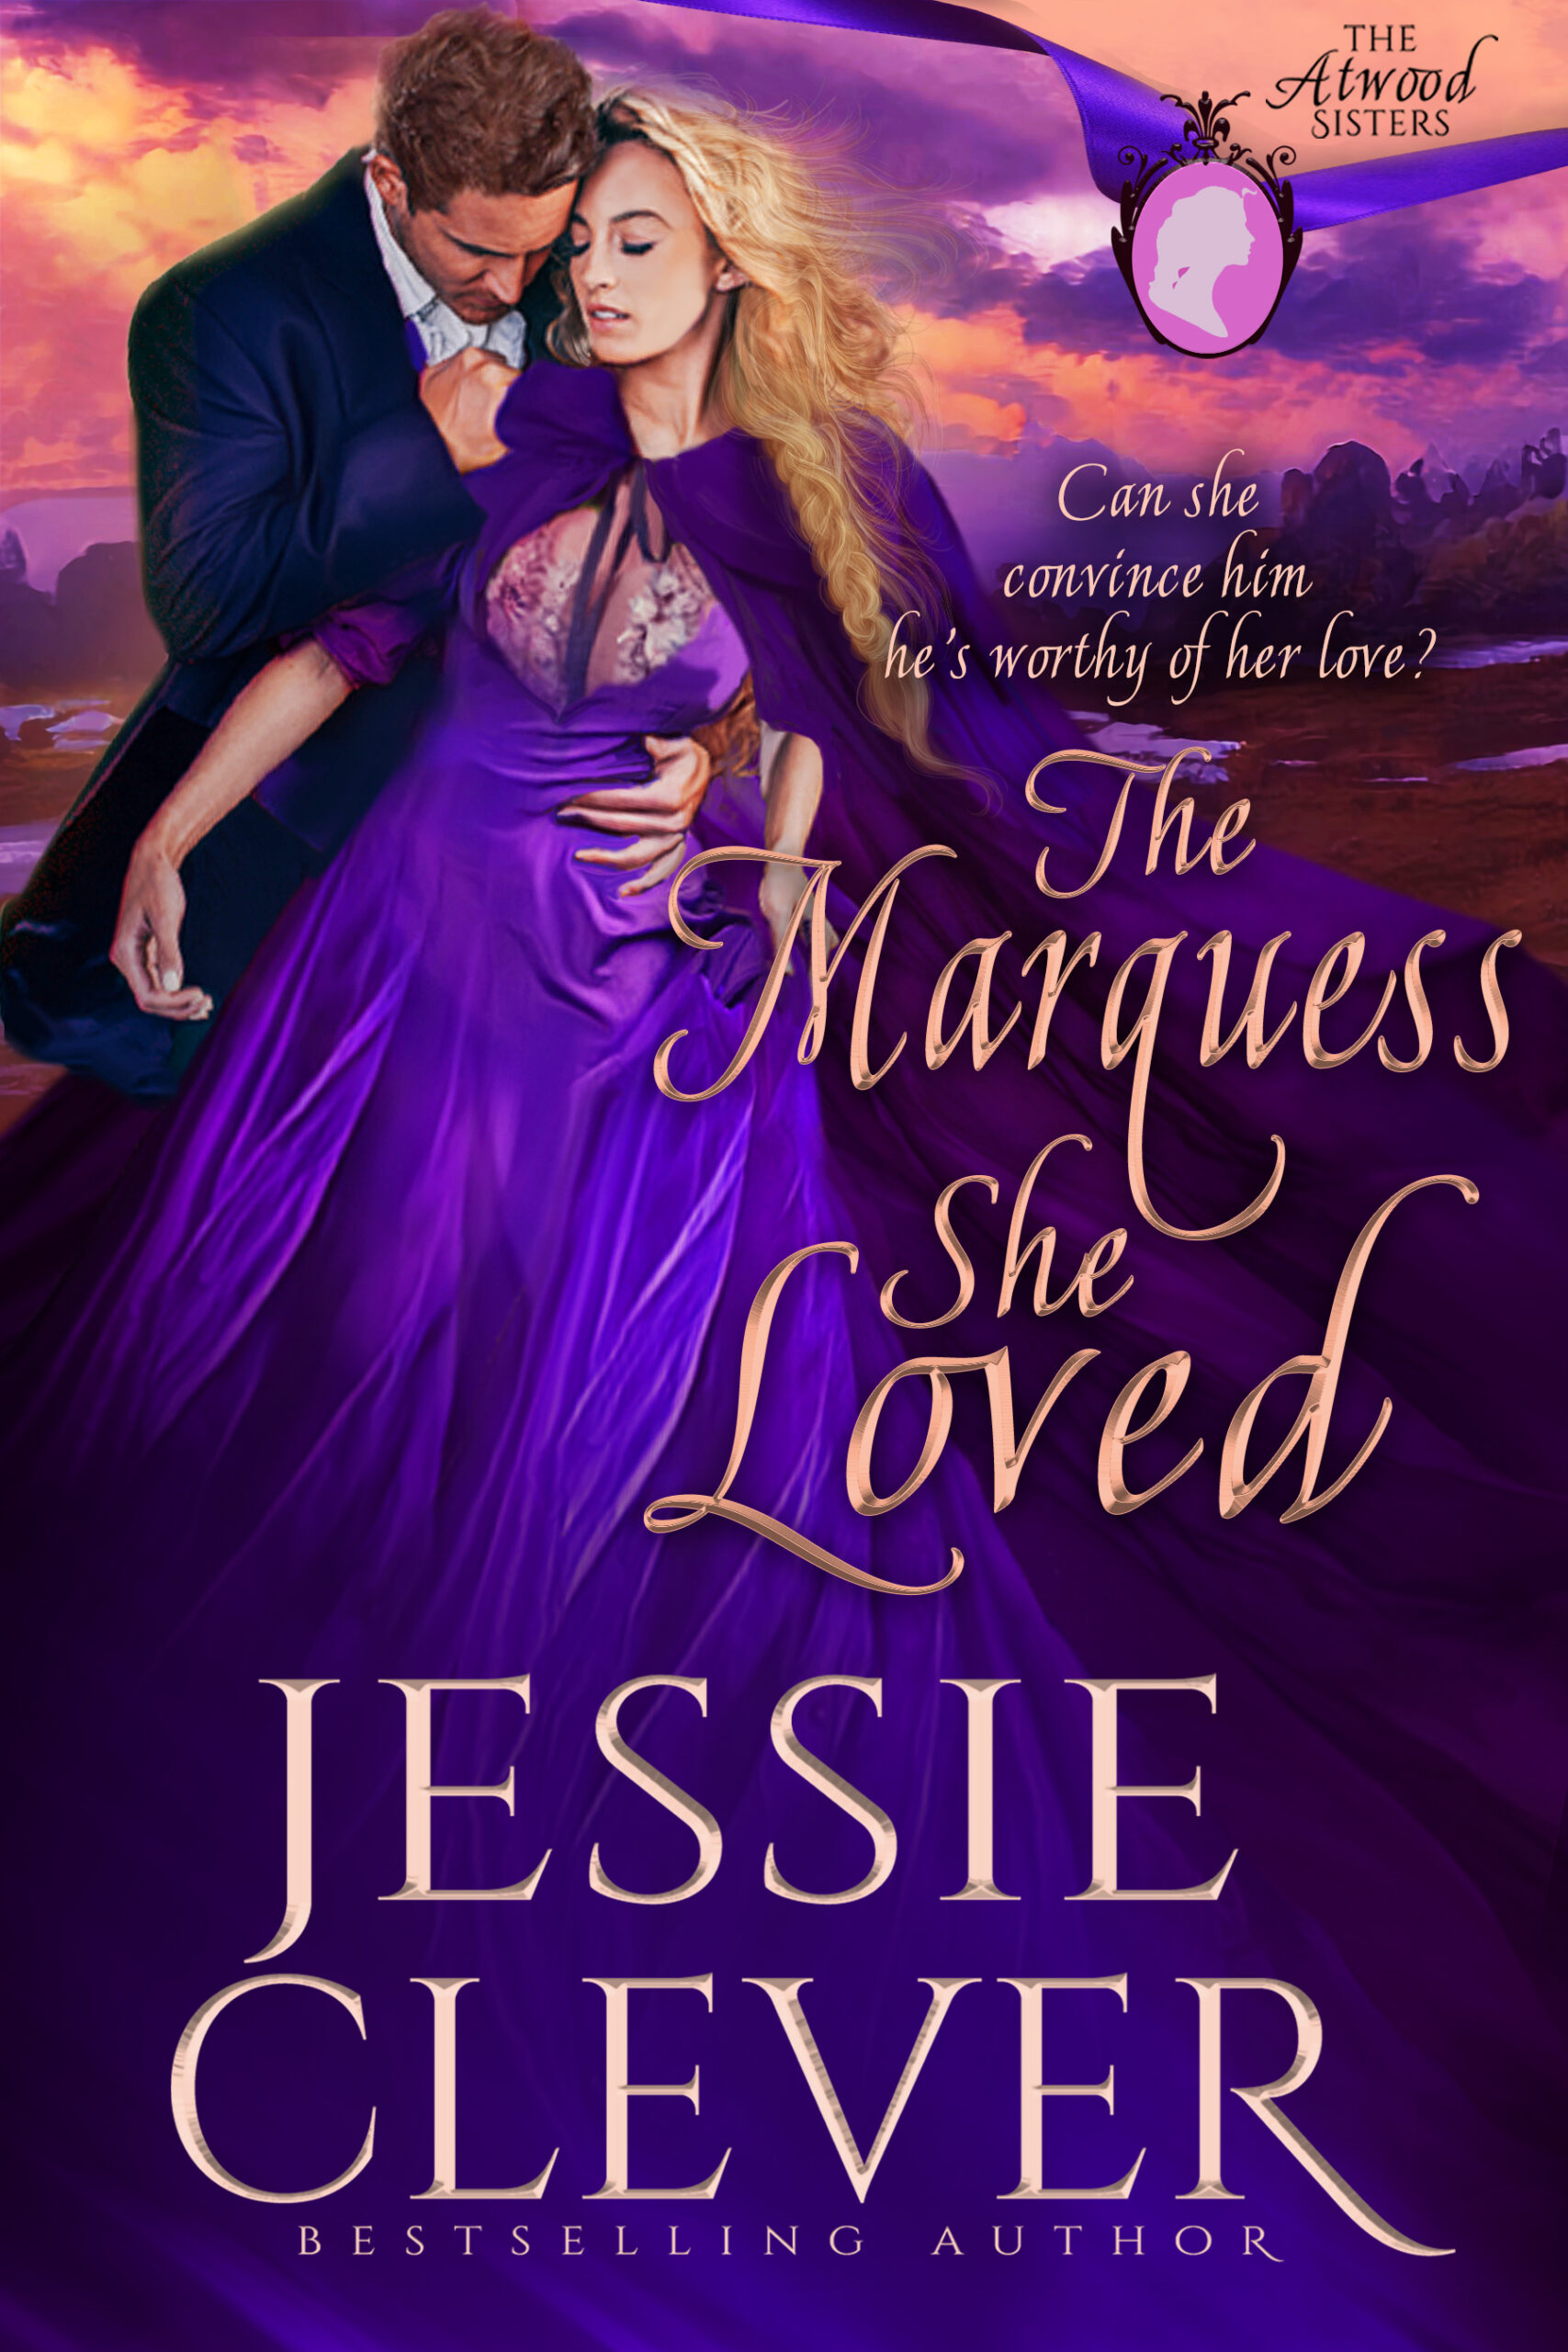 Now Available for Pre-Order: The Marquess She Loved